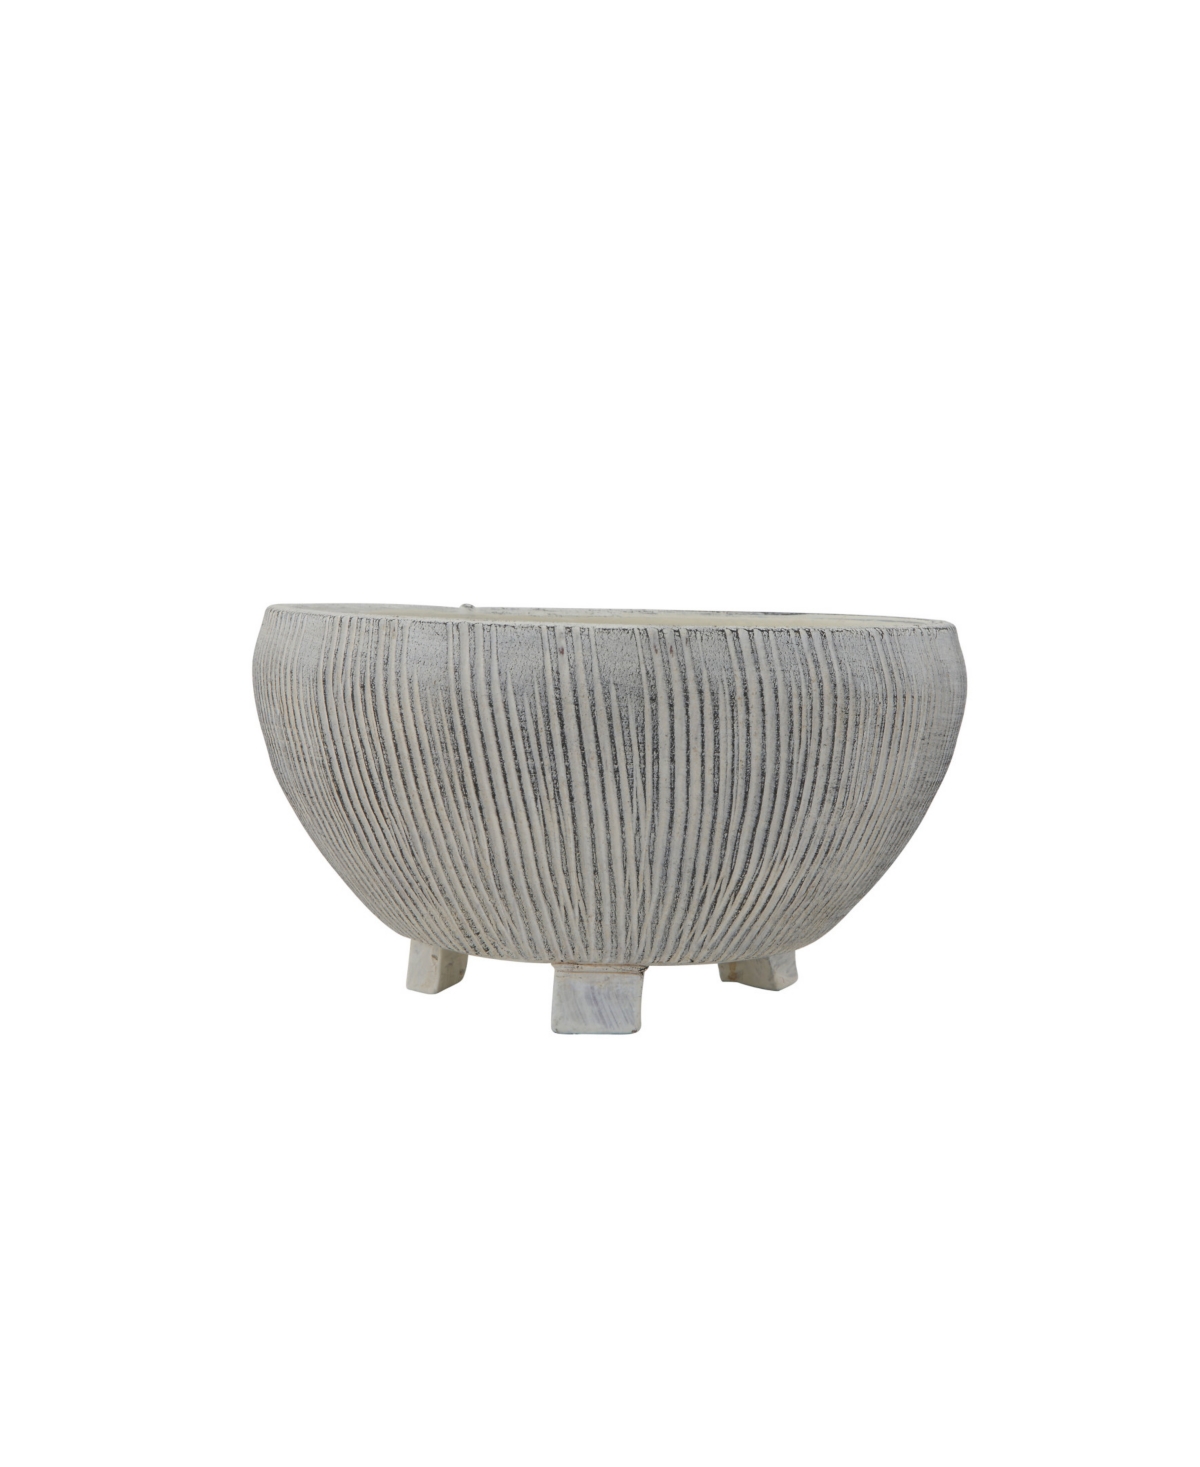 Coastal Terracotta Footed Planter with Textured Stripes - Gray